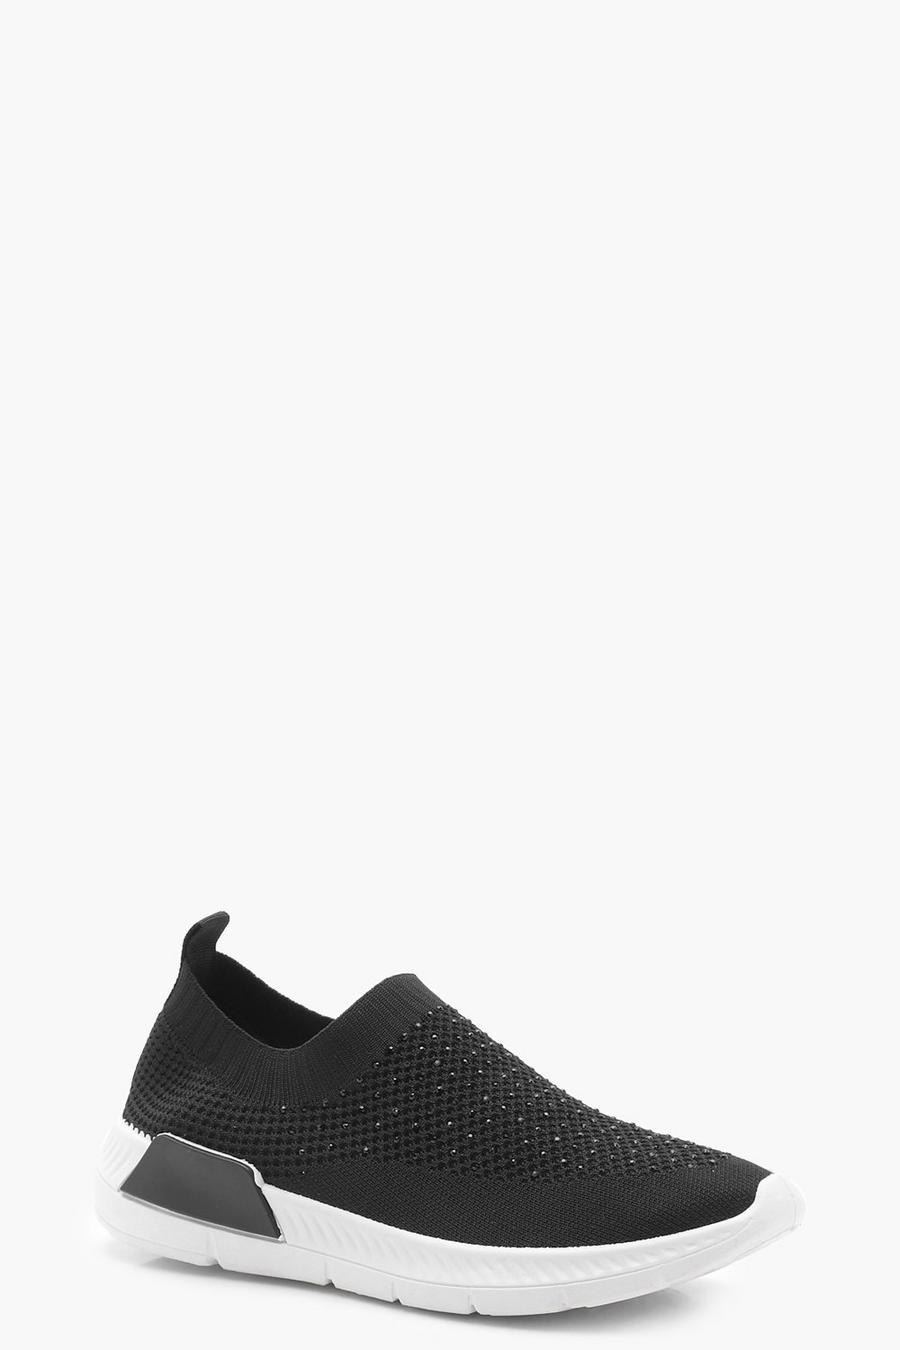 Diamante Knit Slip On Trainers image number 1